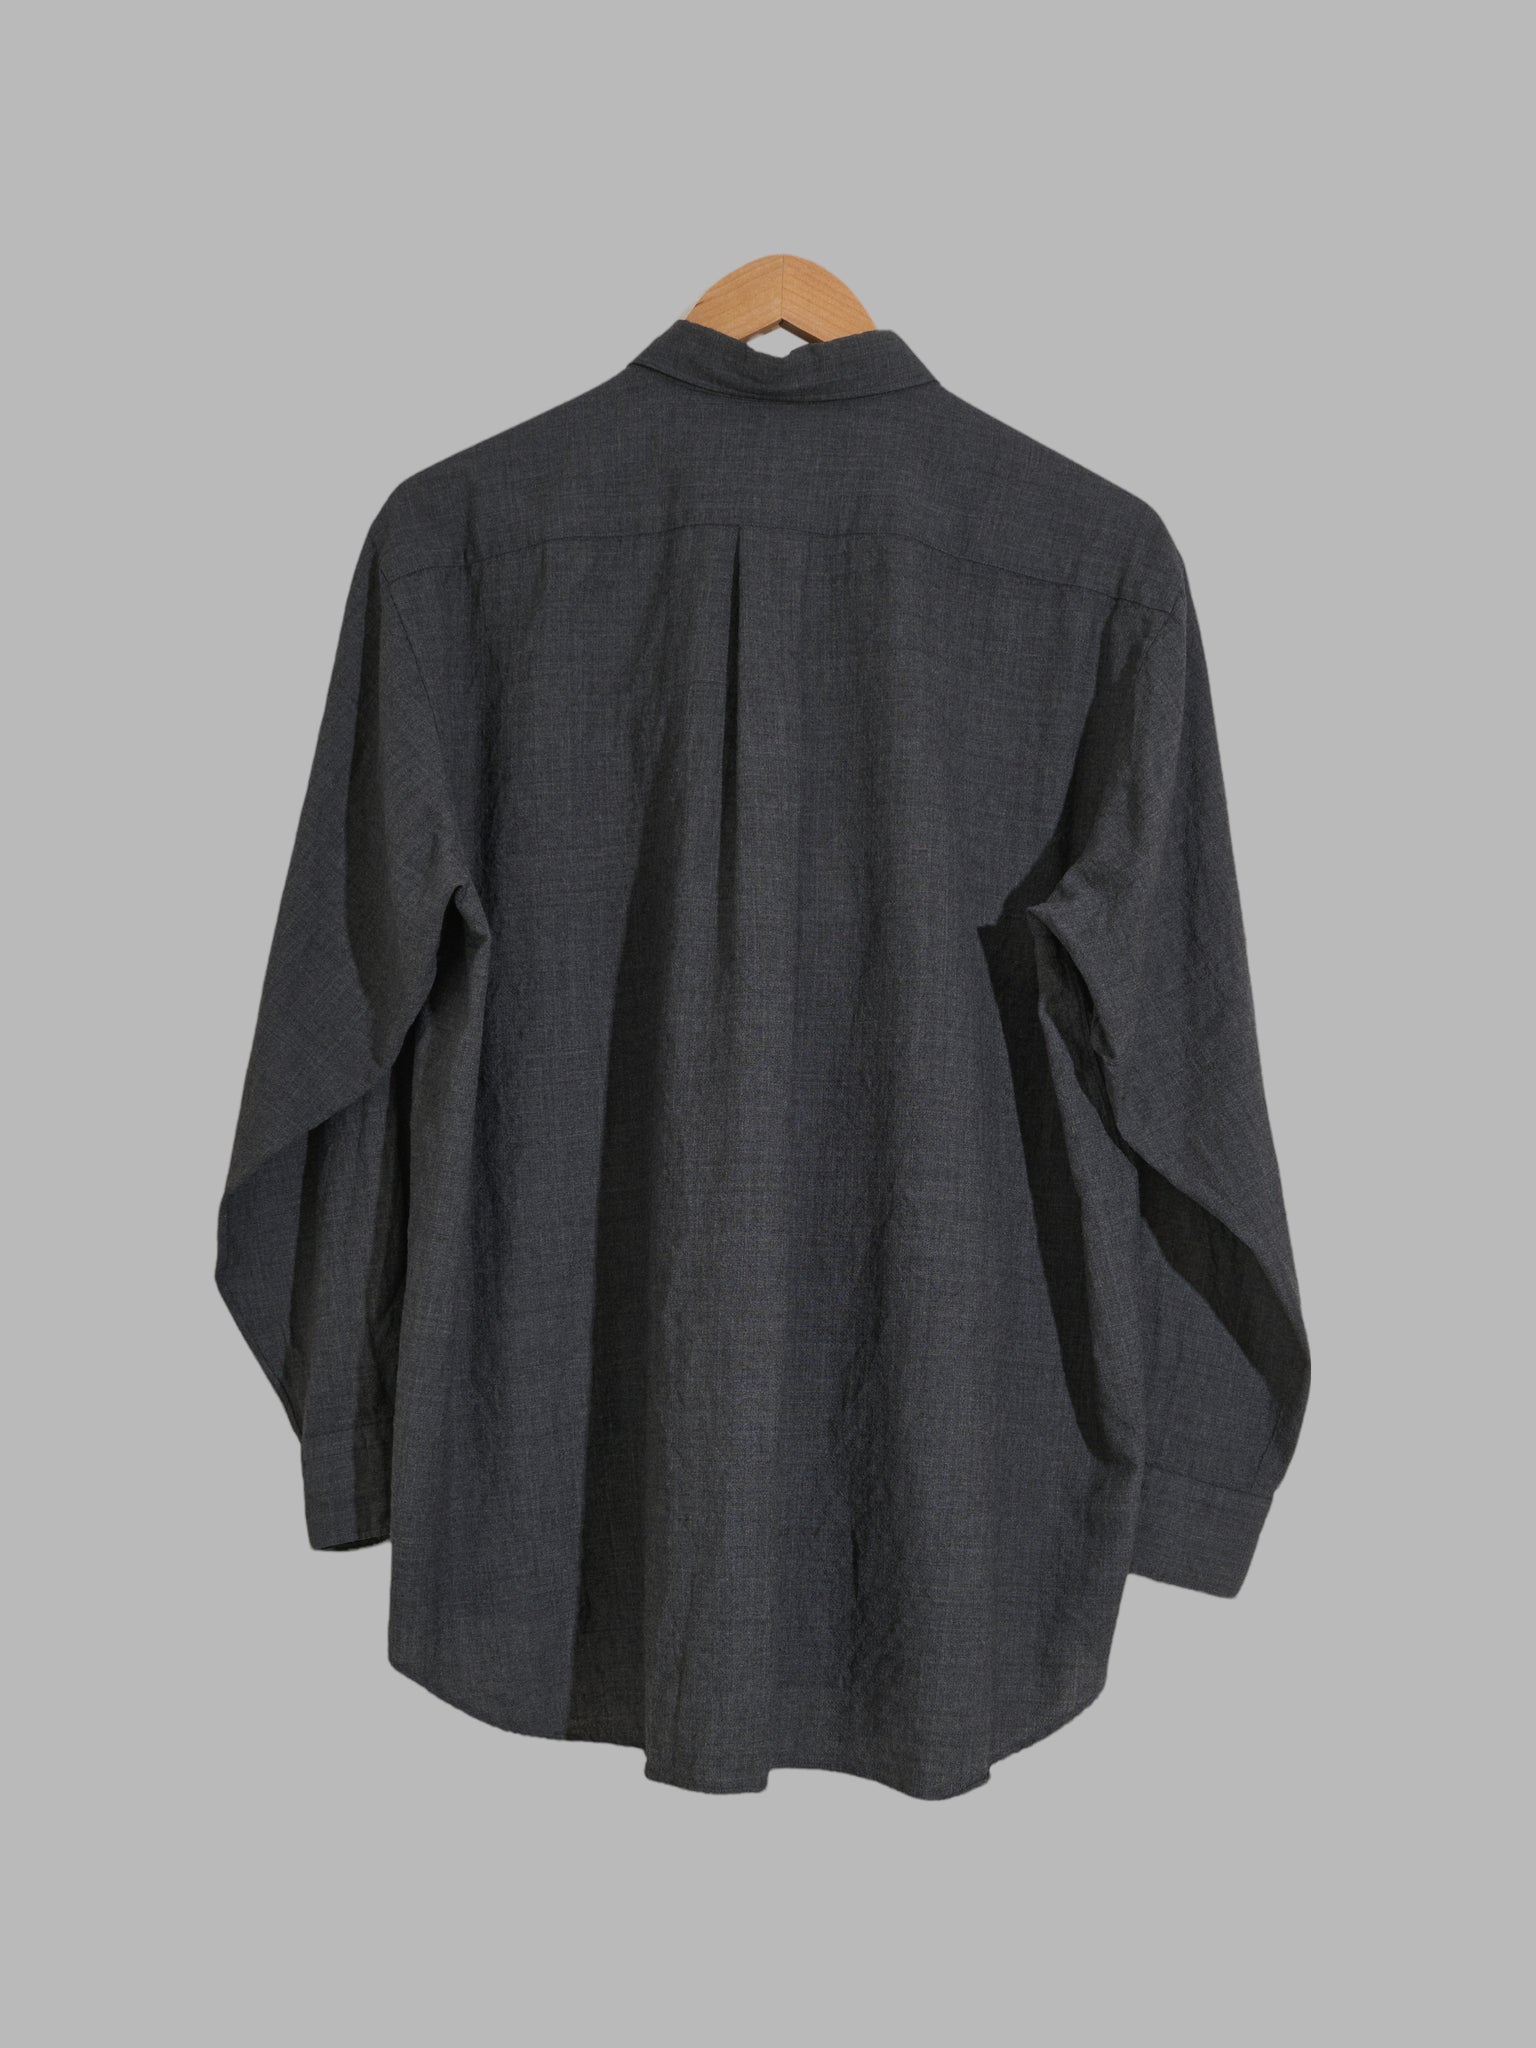 Comme des Garcons Homme 1998 charcoal grey wool pintuck shirt - L M